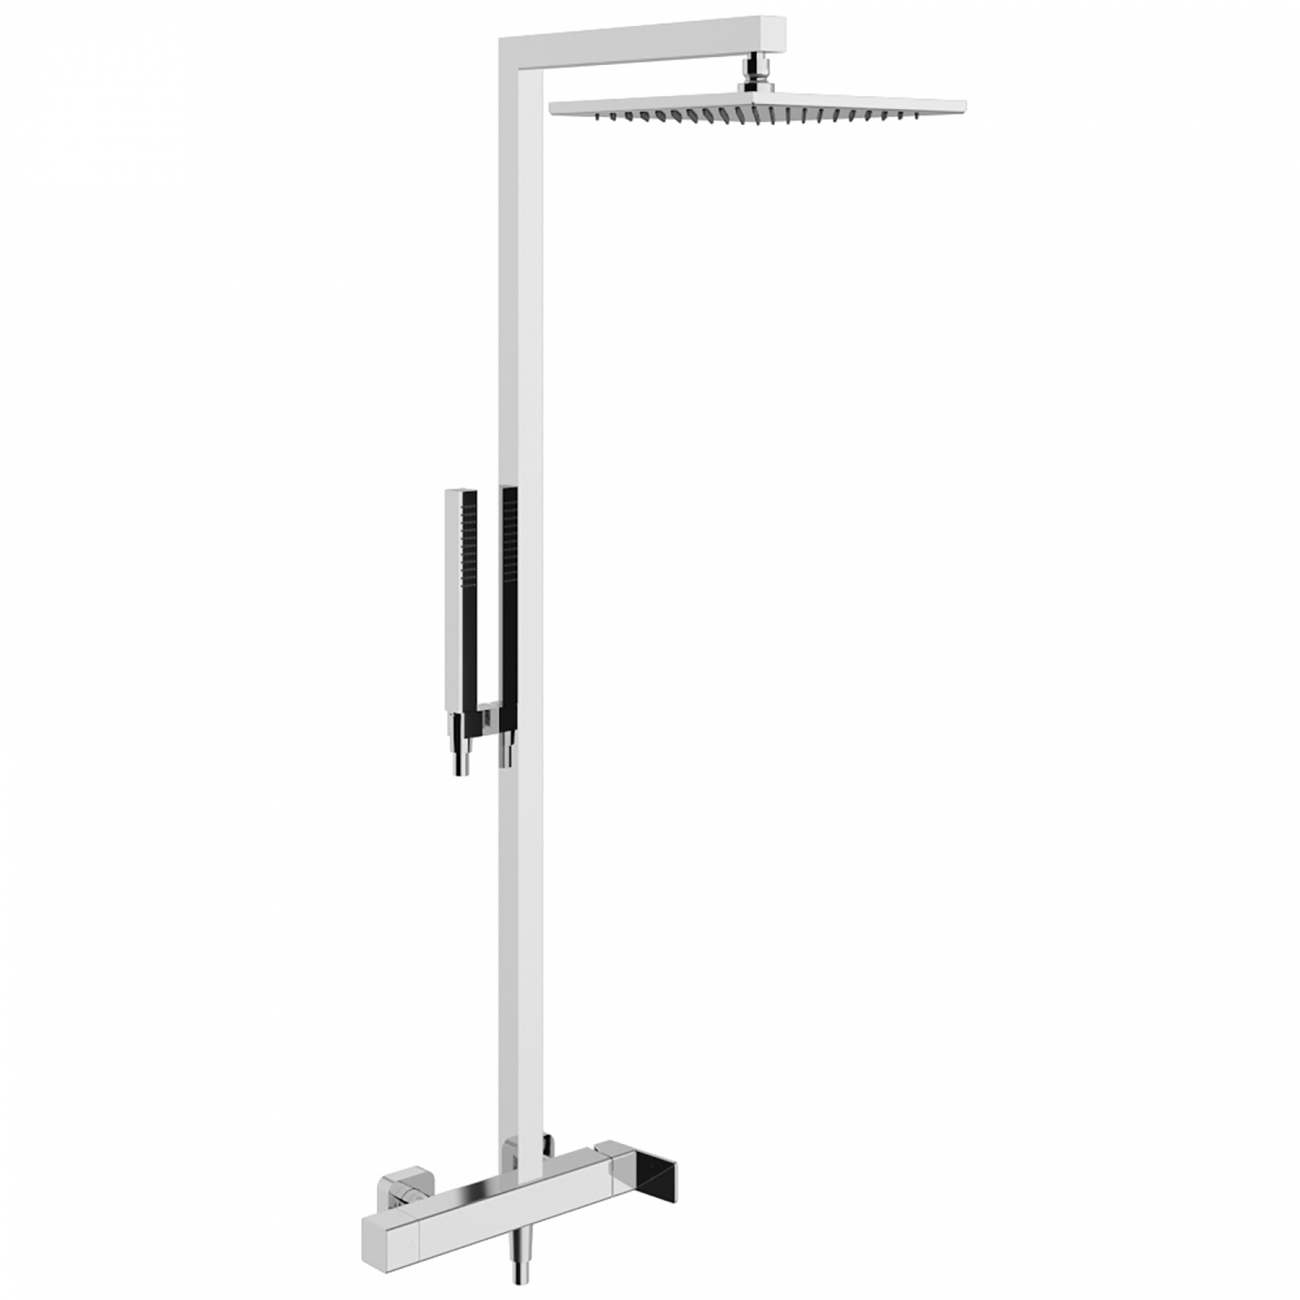 Treemme Pa36 wall-mounted shower column